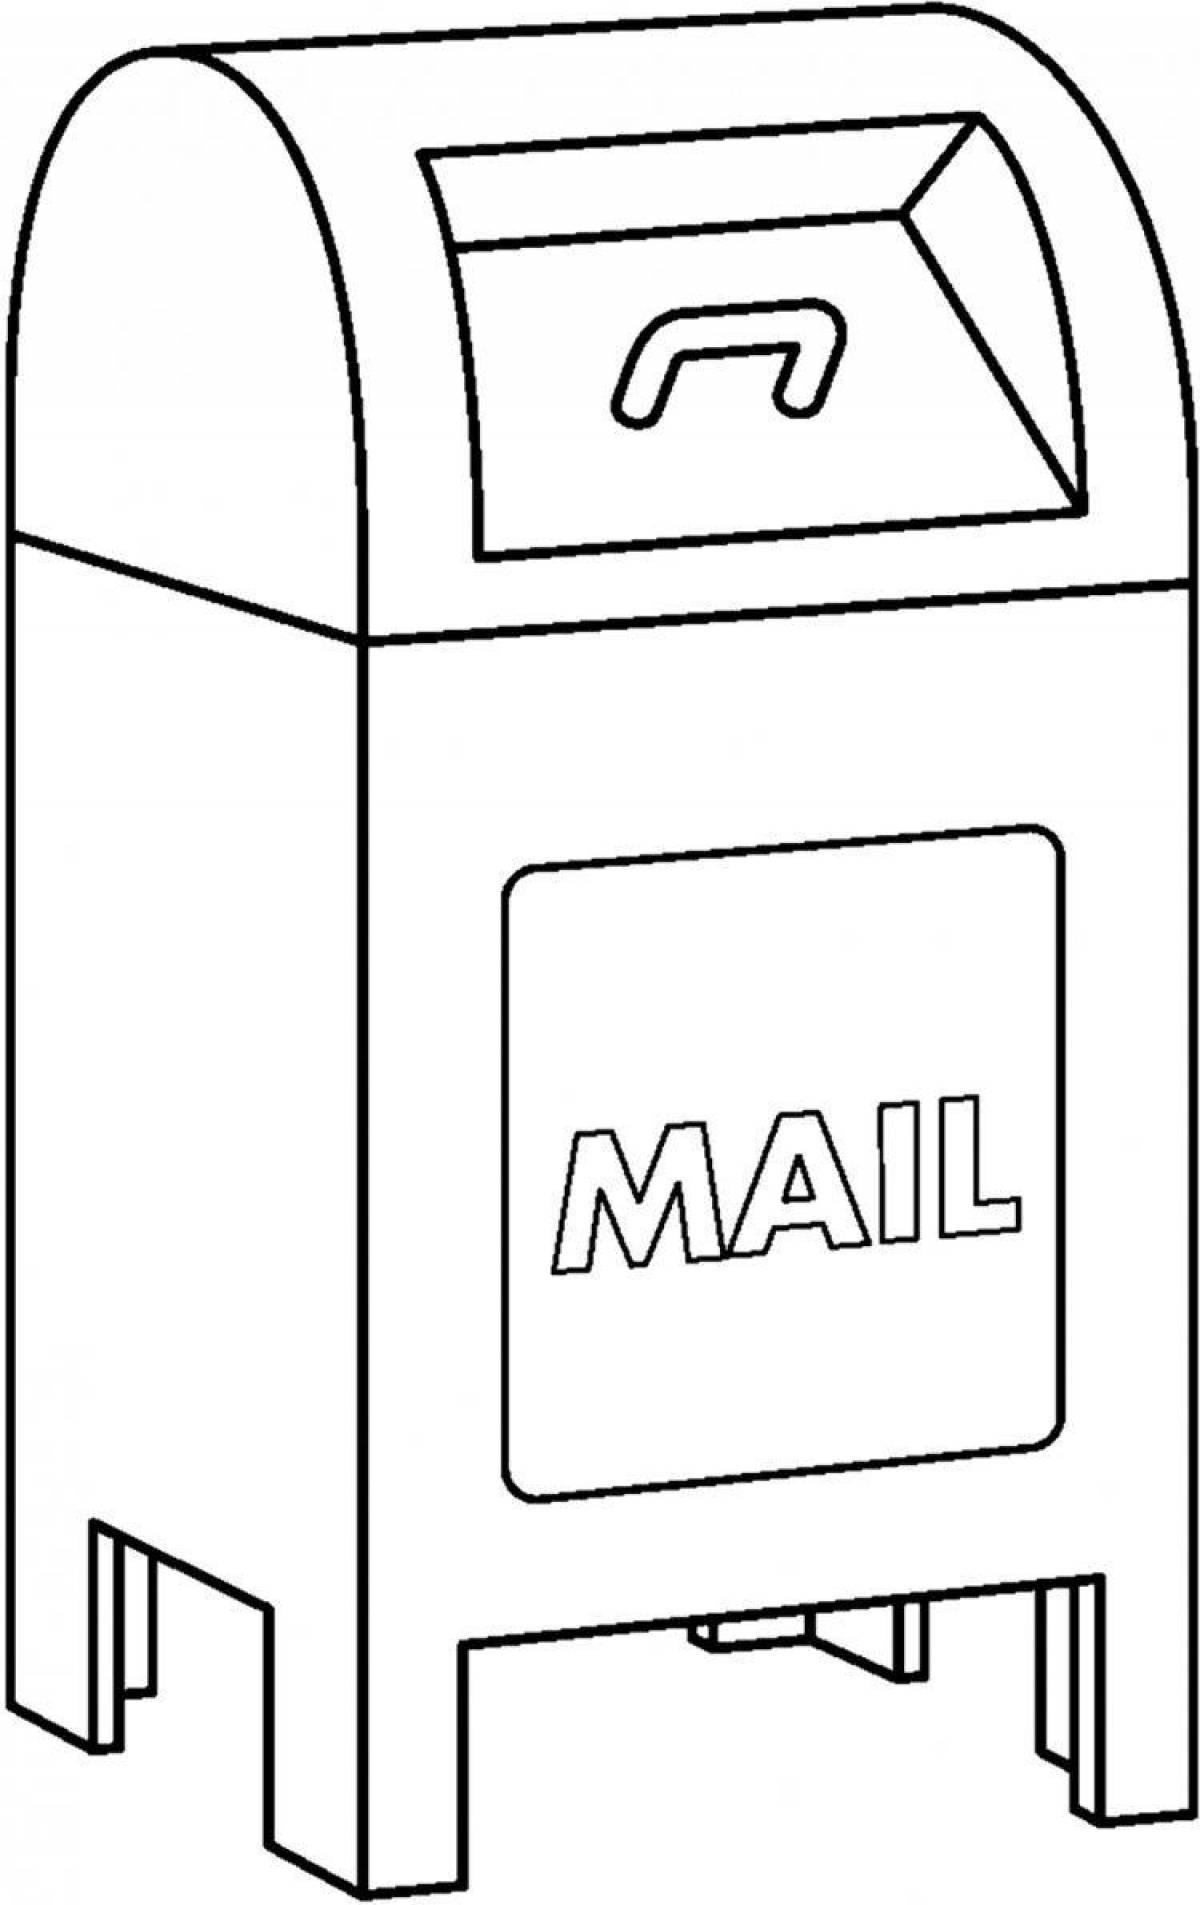 Sparkling mailbox coloring page